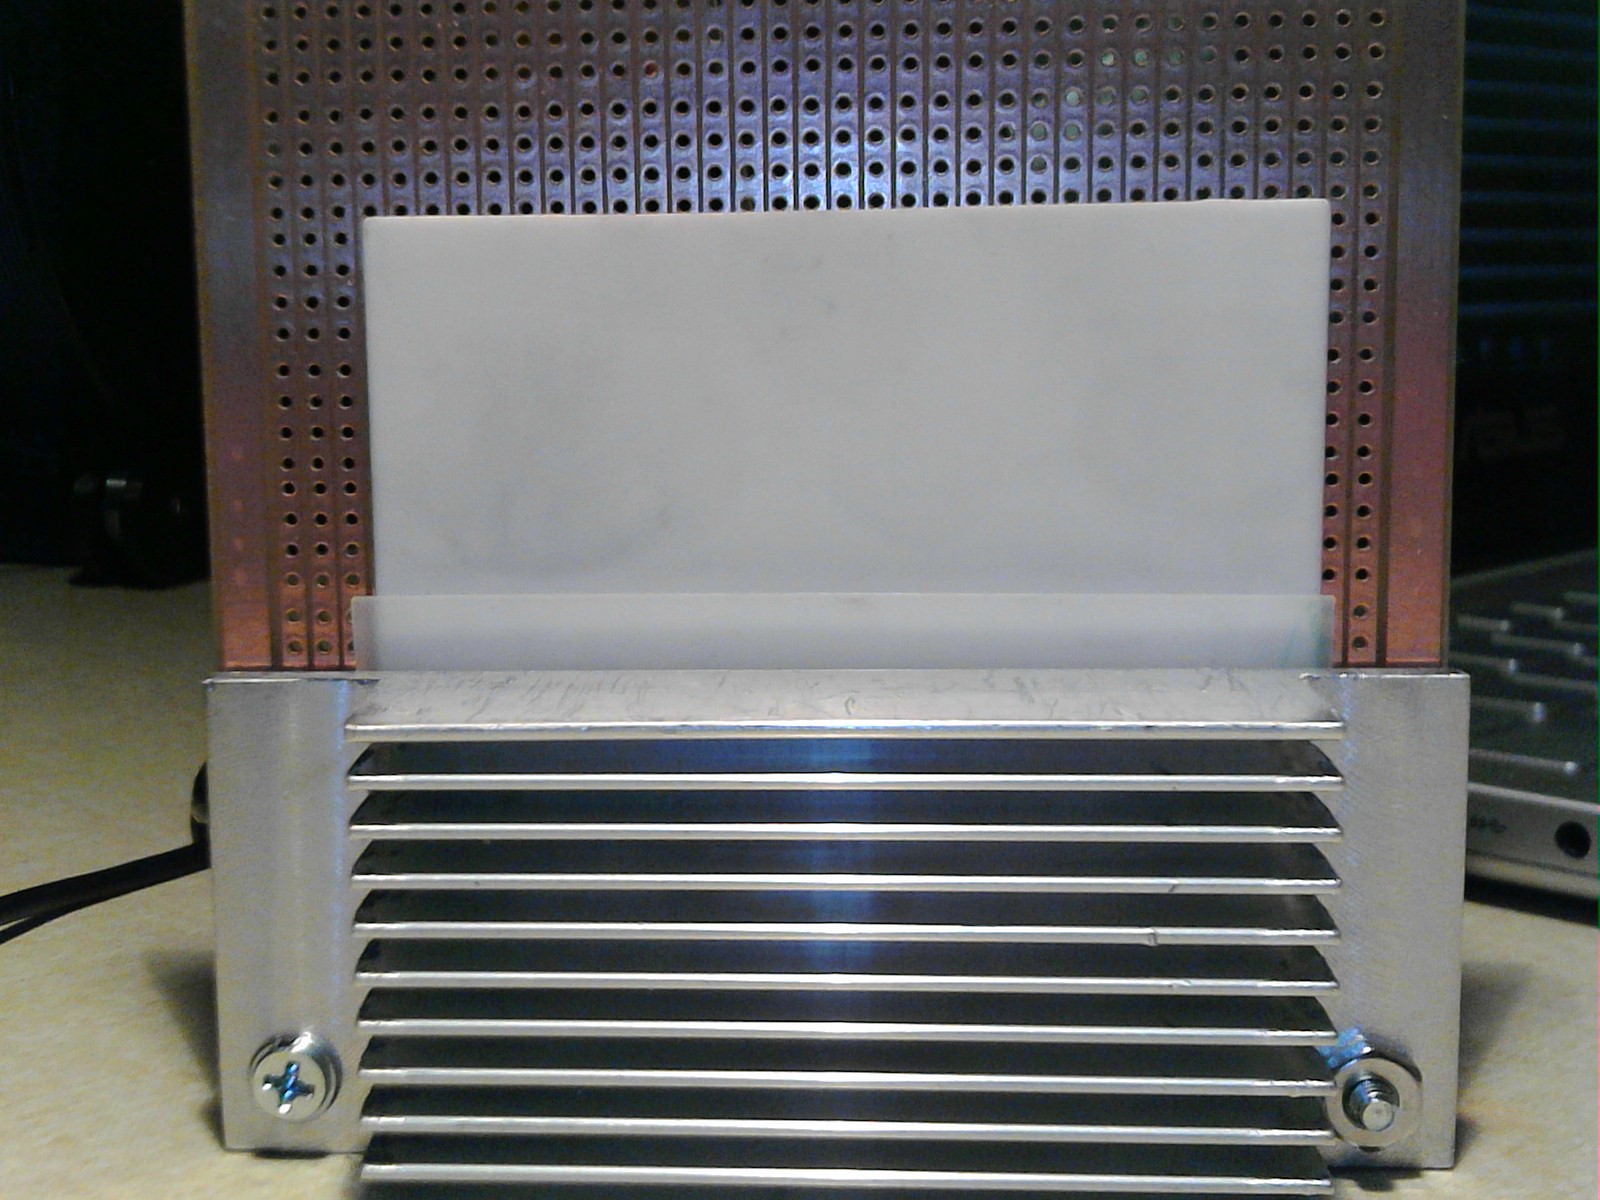 in the foreground, the aluminum heat sink, and left and right, the 6-32" clamping screws are visible, as is the white aluminum oxide substrate, and silicone pad. In the background, the strip board fills the space and provides electrical contact to the silicon carbide filament.